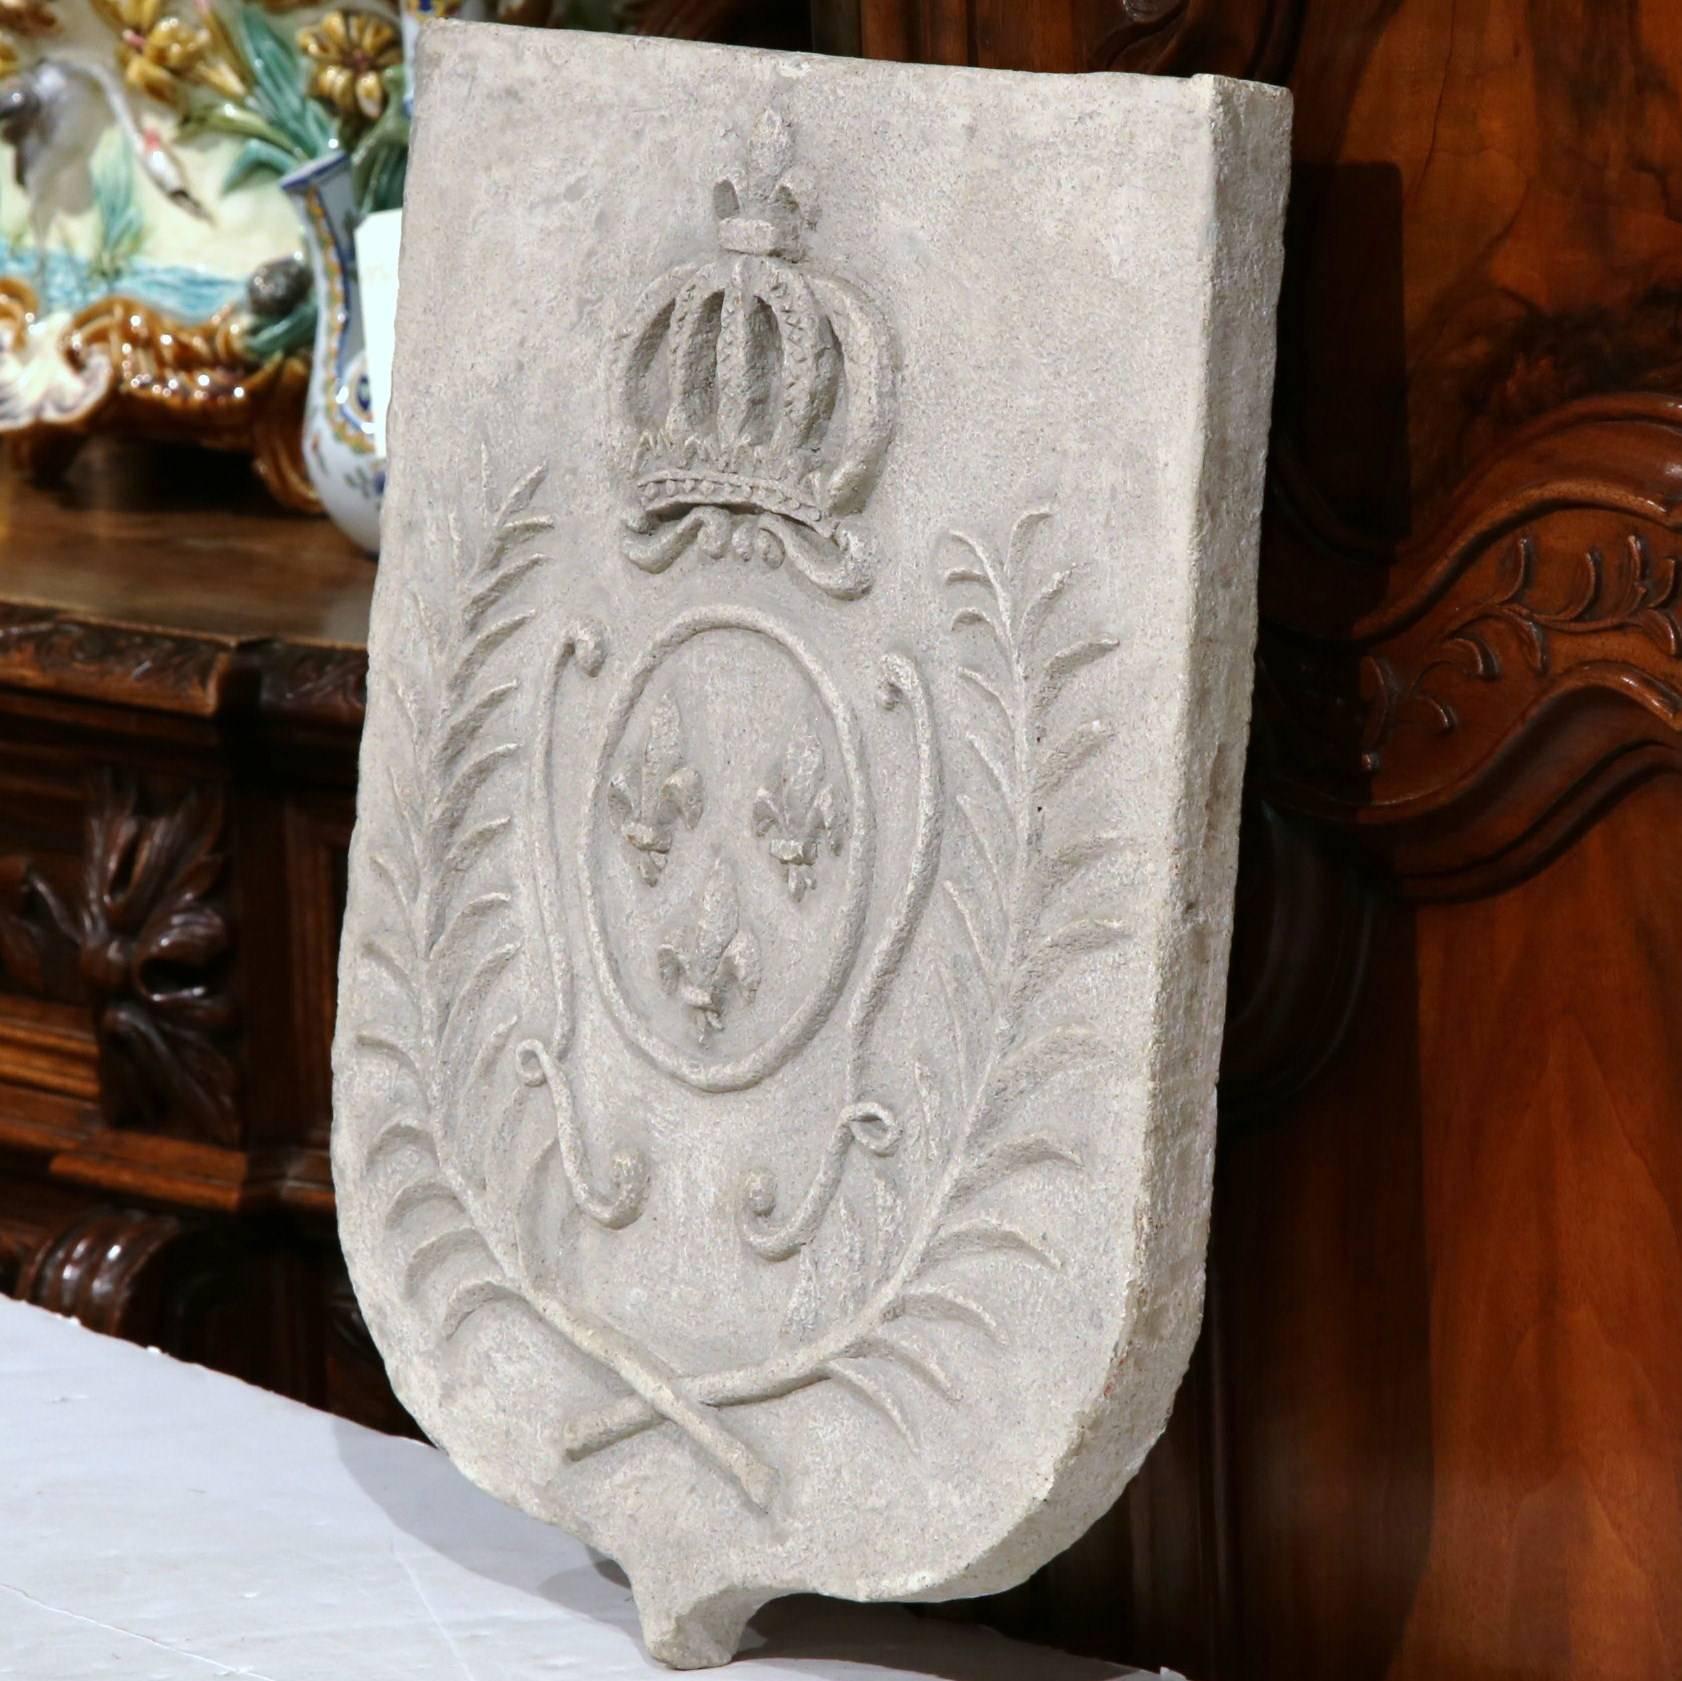 This elegant, antique cast stone crest represents the grand royal coat of arms of the kingdom of France. The traditional crest was made circa 1890 and has three fleurs-de-lys and the king's crown. The stone piece is in excellent condition and has a